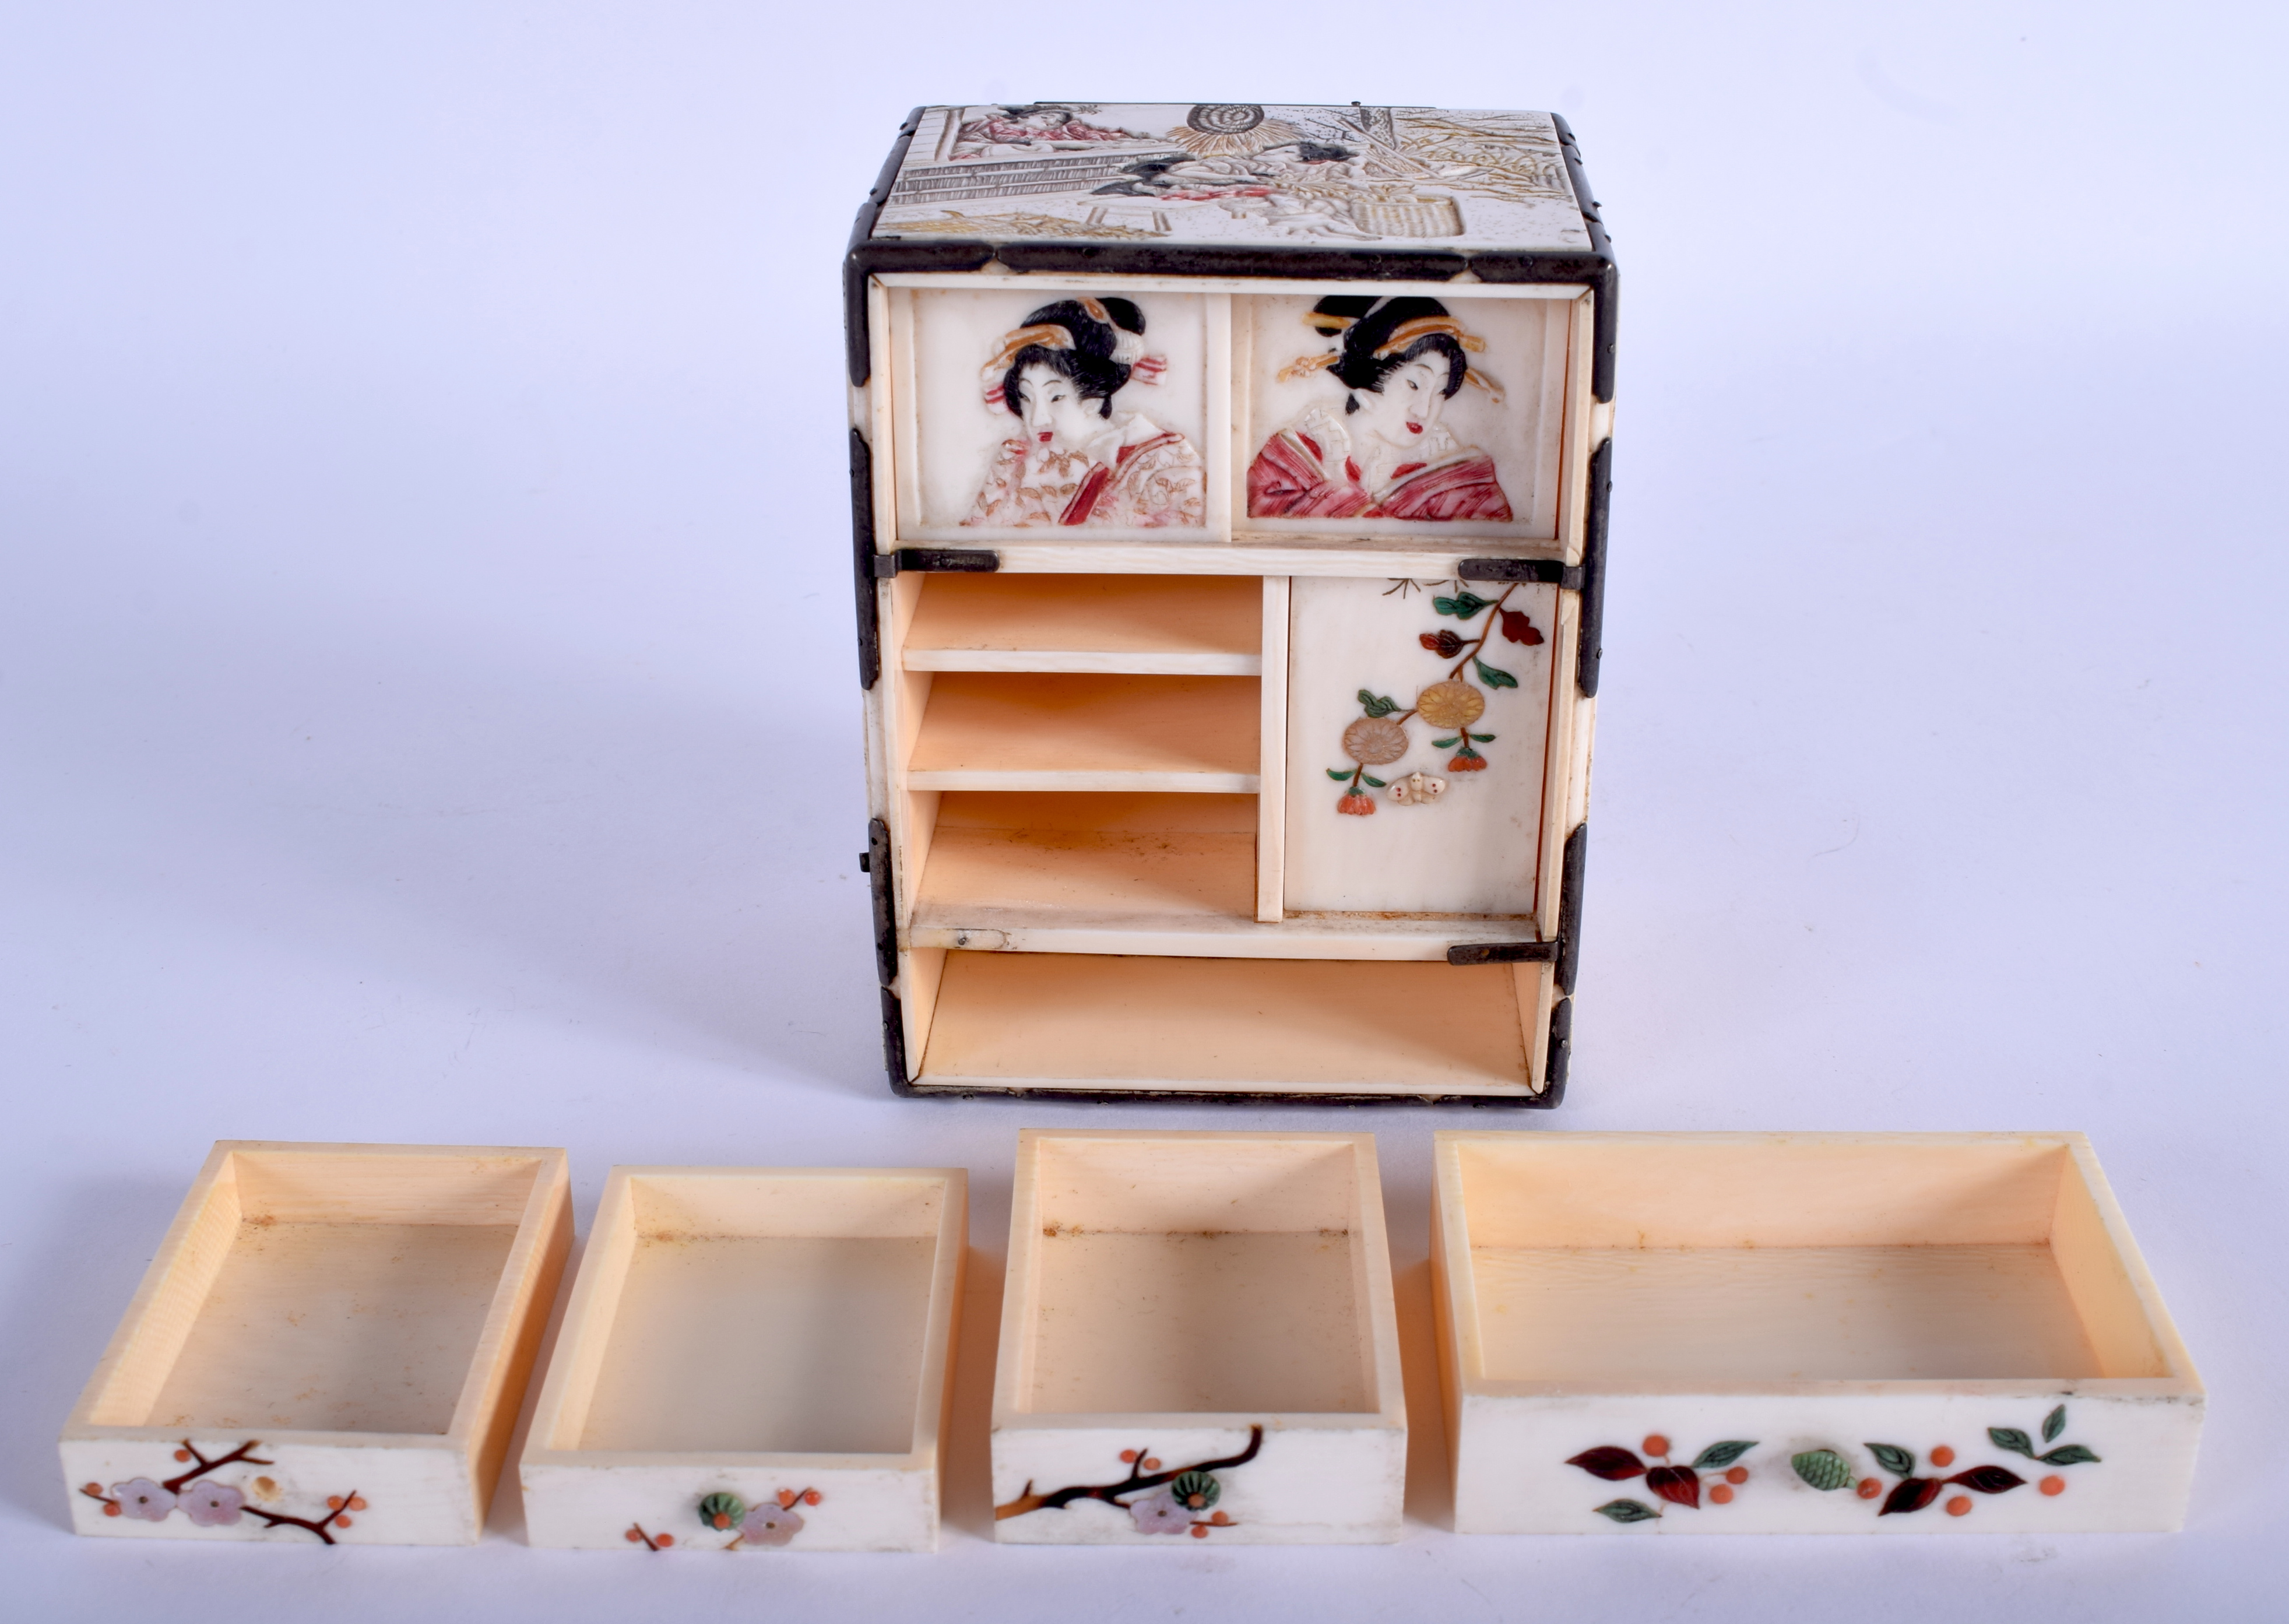 A 19TH CENTURY JAPANESE MEIJI PERIOD CARVED IVORY CABINET with shibayama inlaid decoration. 10 cm x - Image 3 of 3